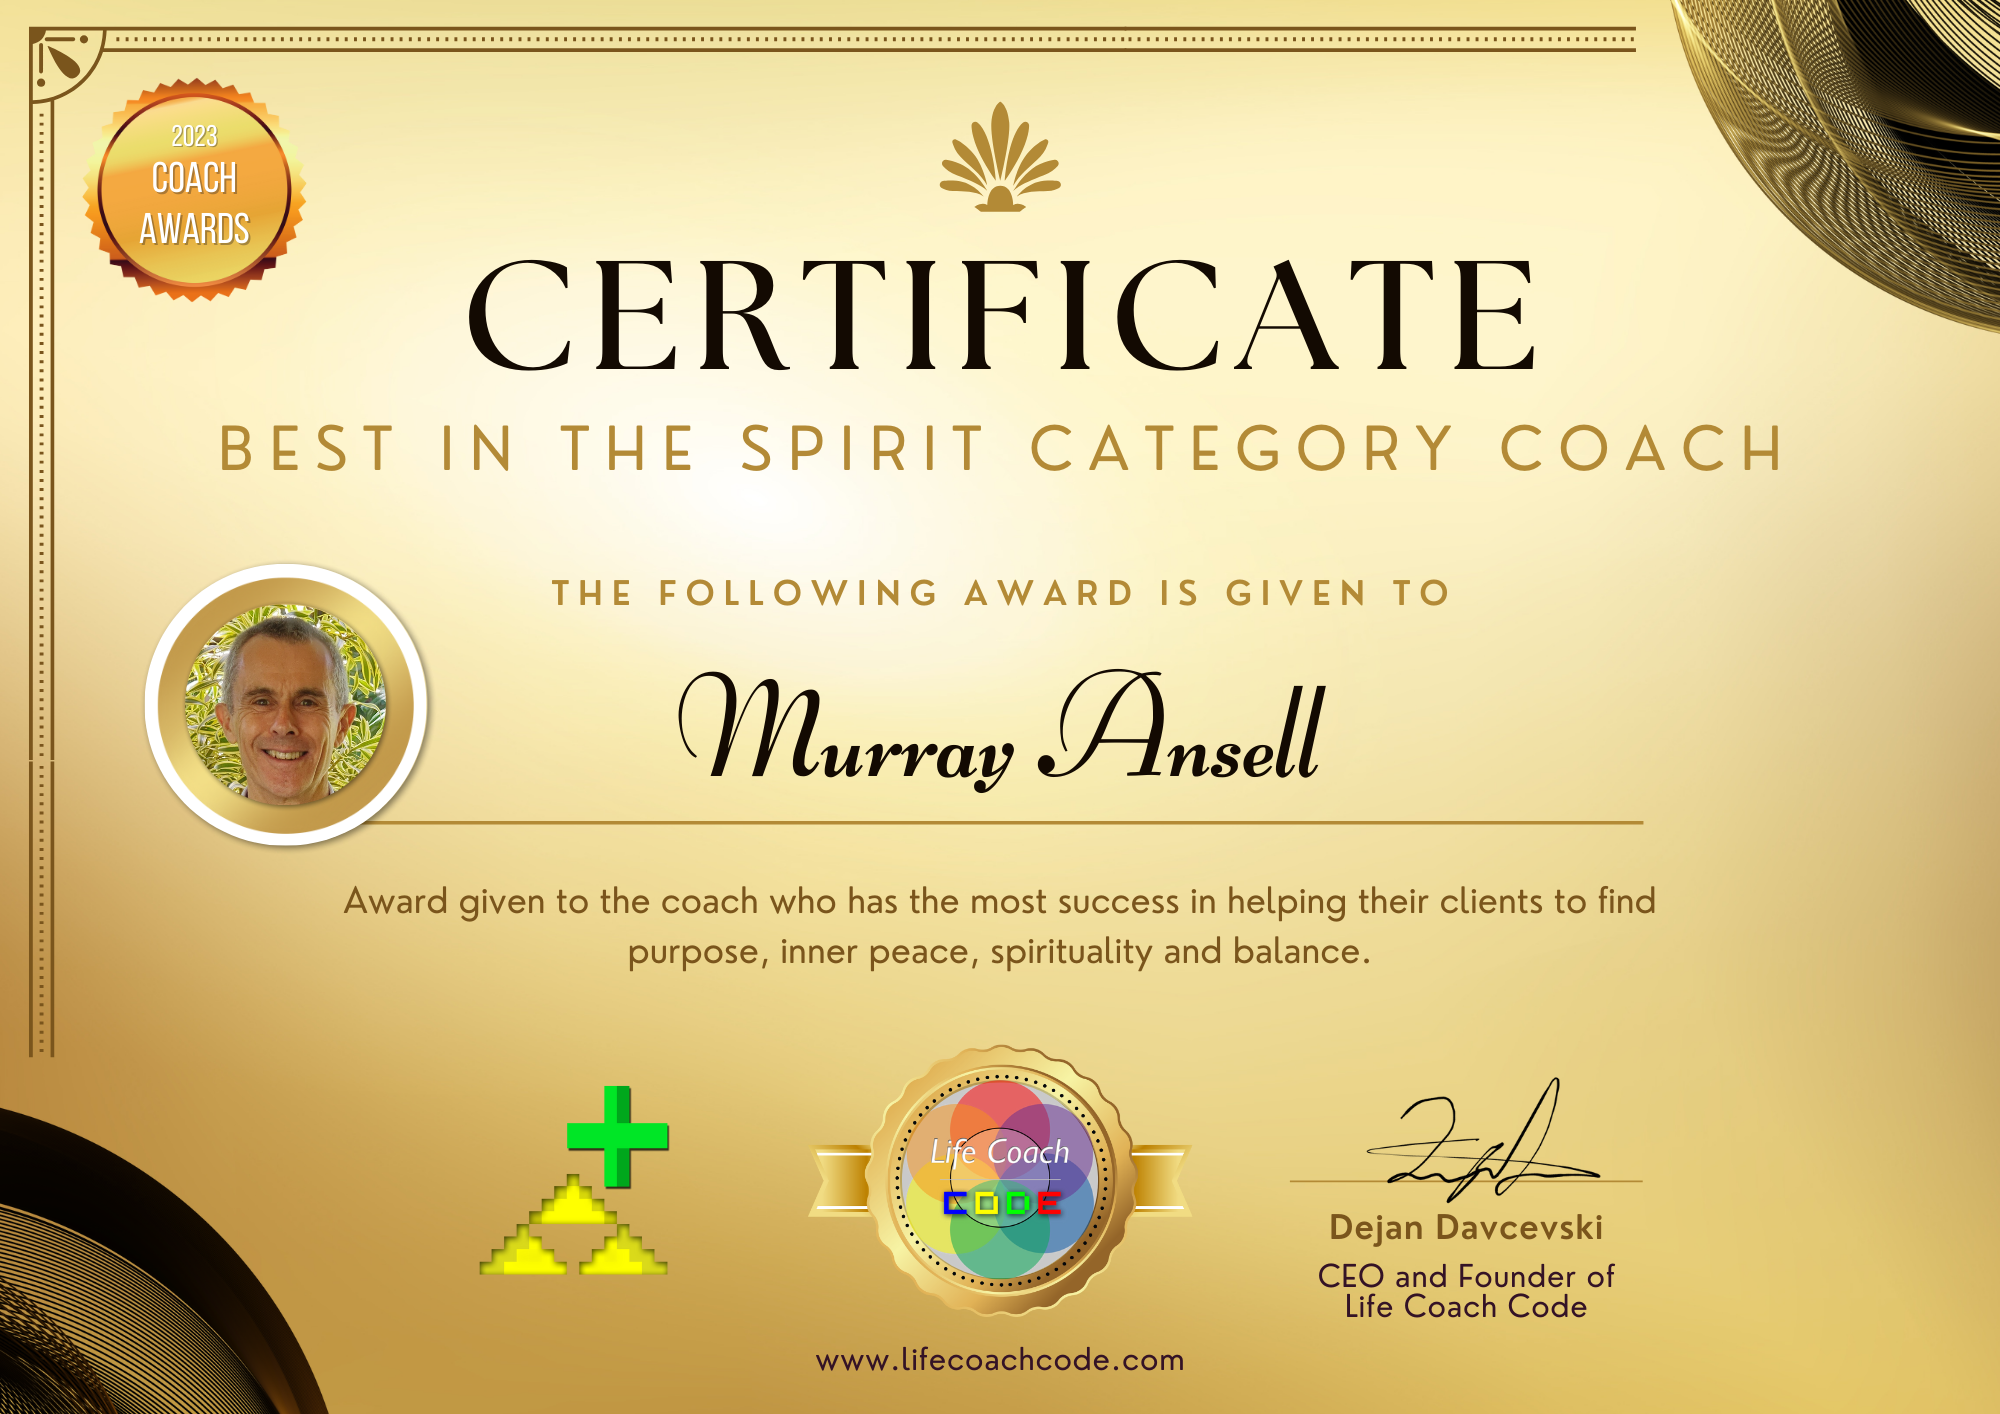 Coach Awards Best in the spirit category coach